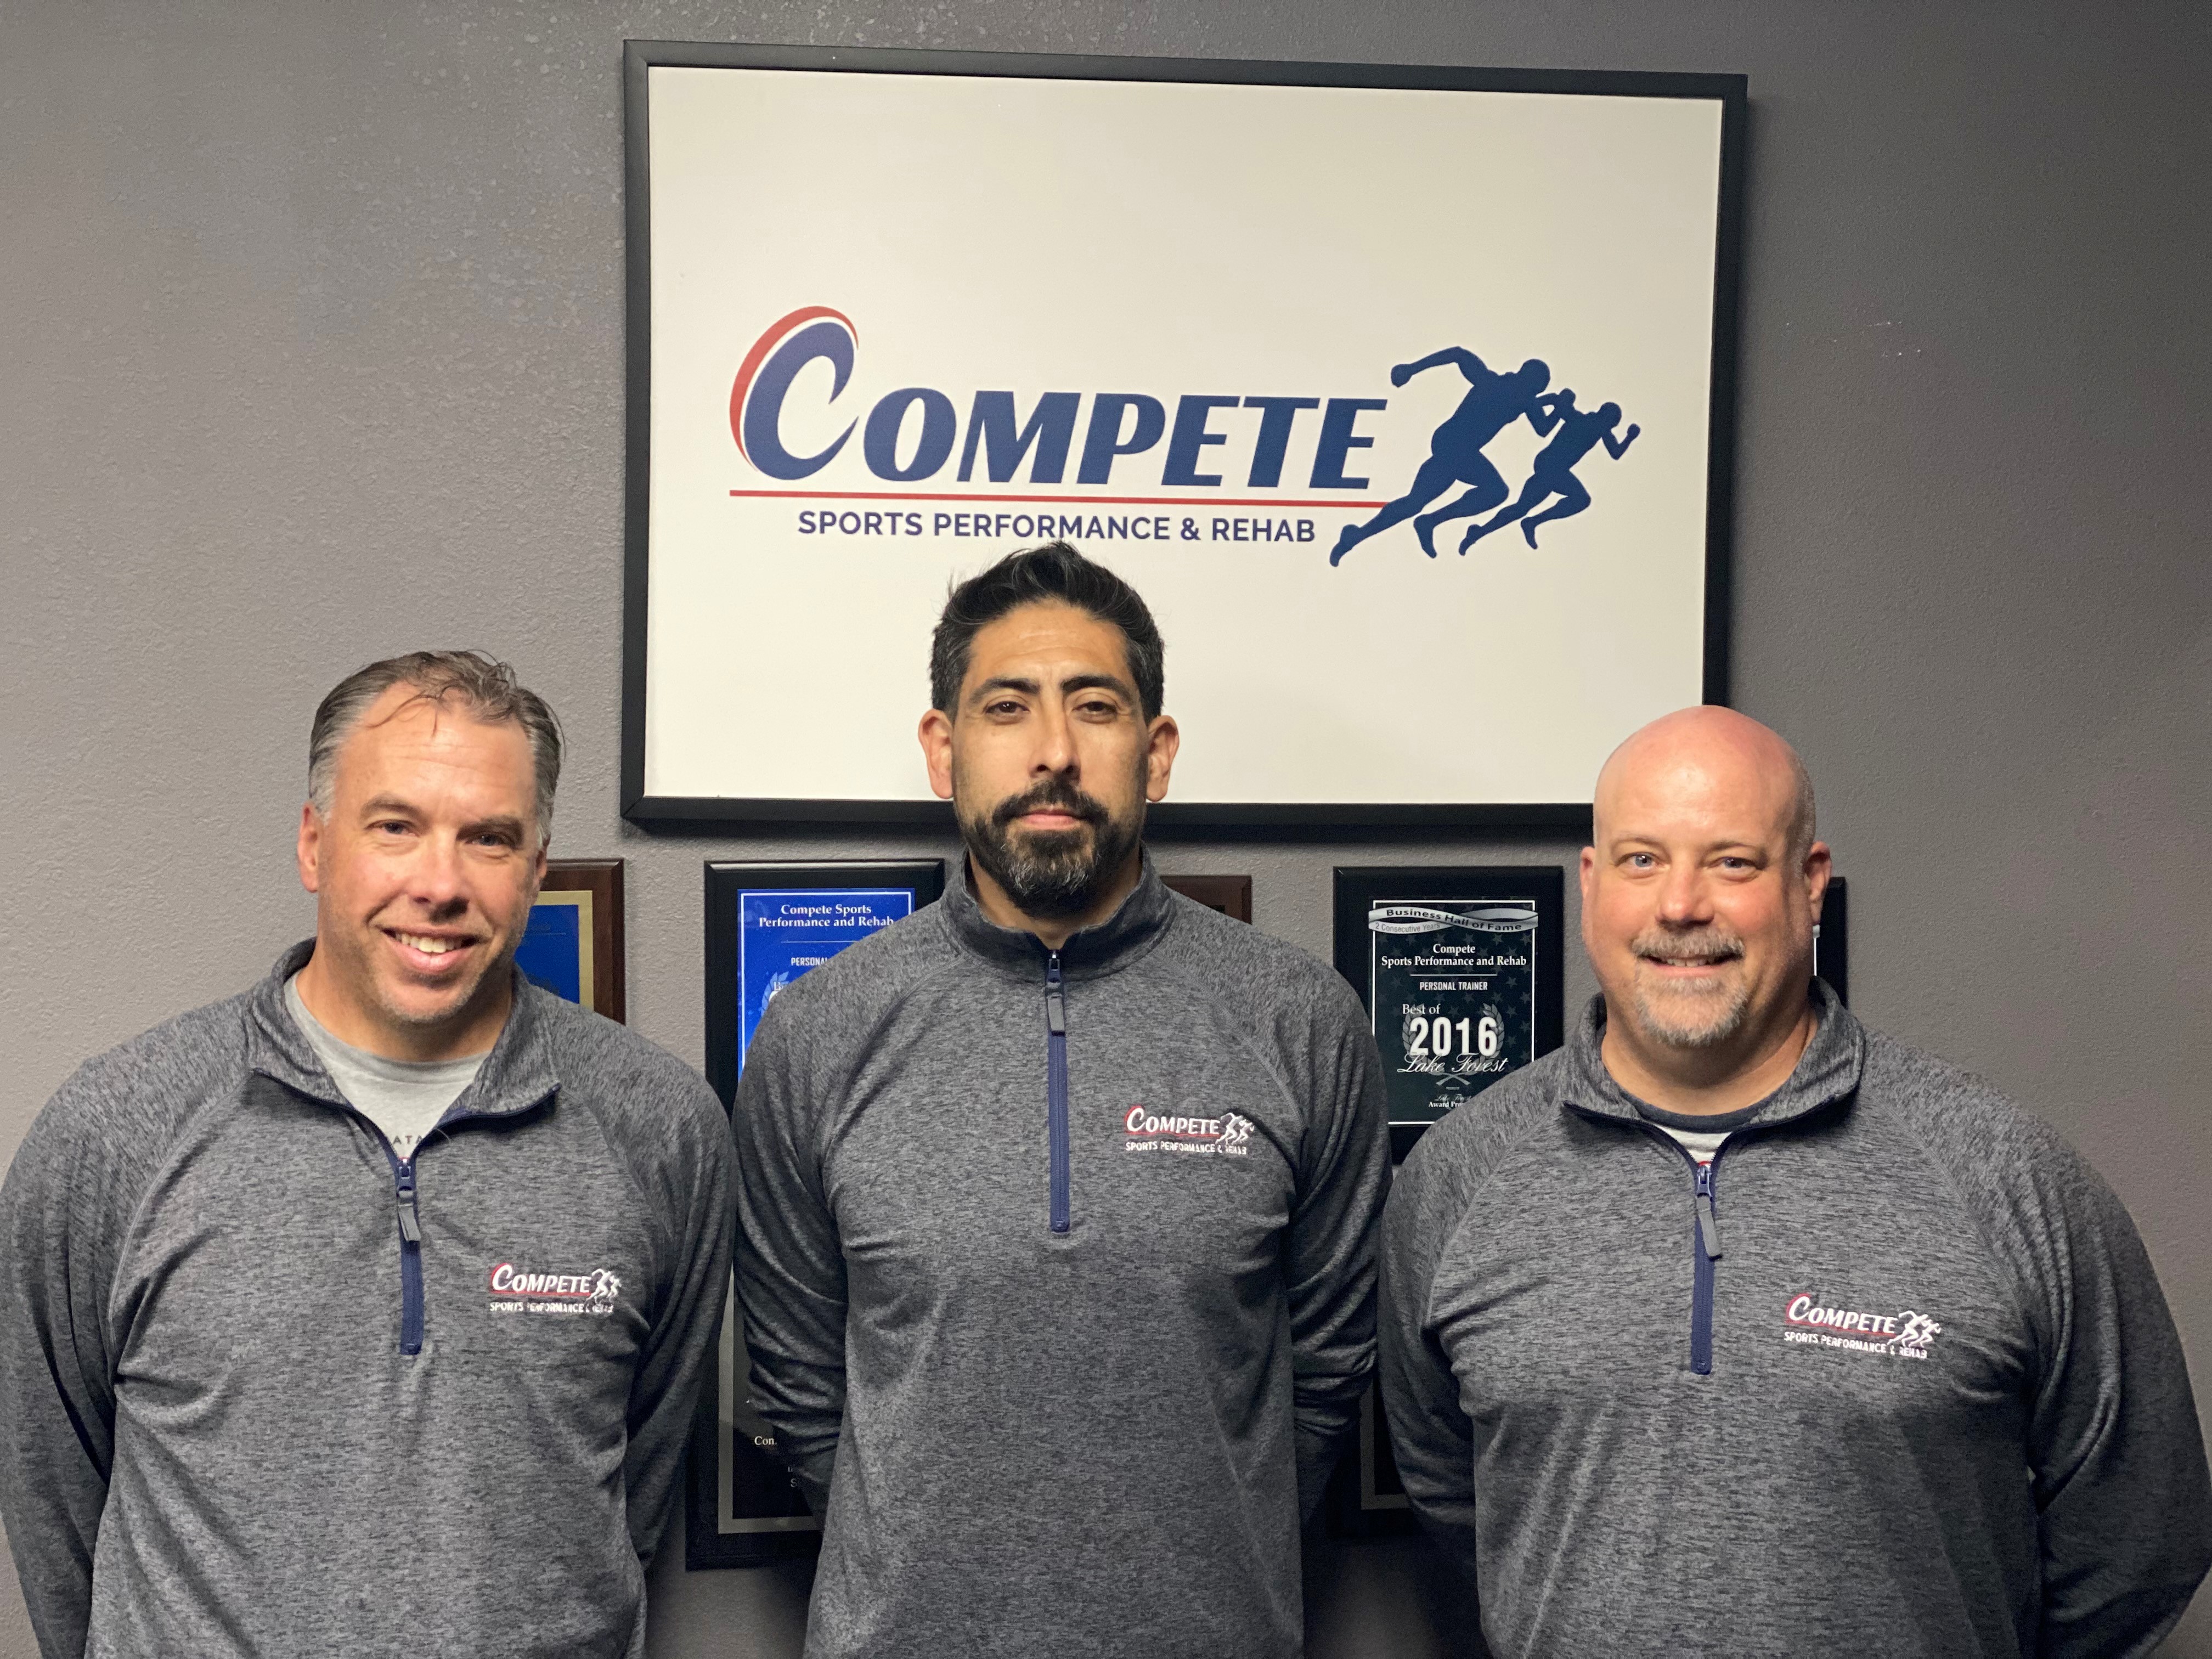 Compete's Yorba Linda Owners: Mike Hannegan, Marco Nunez and Chris Phillips